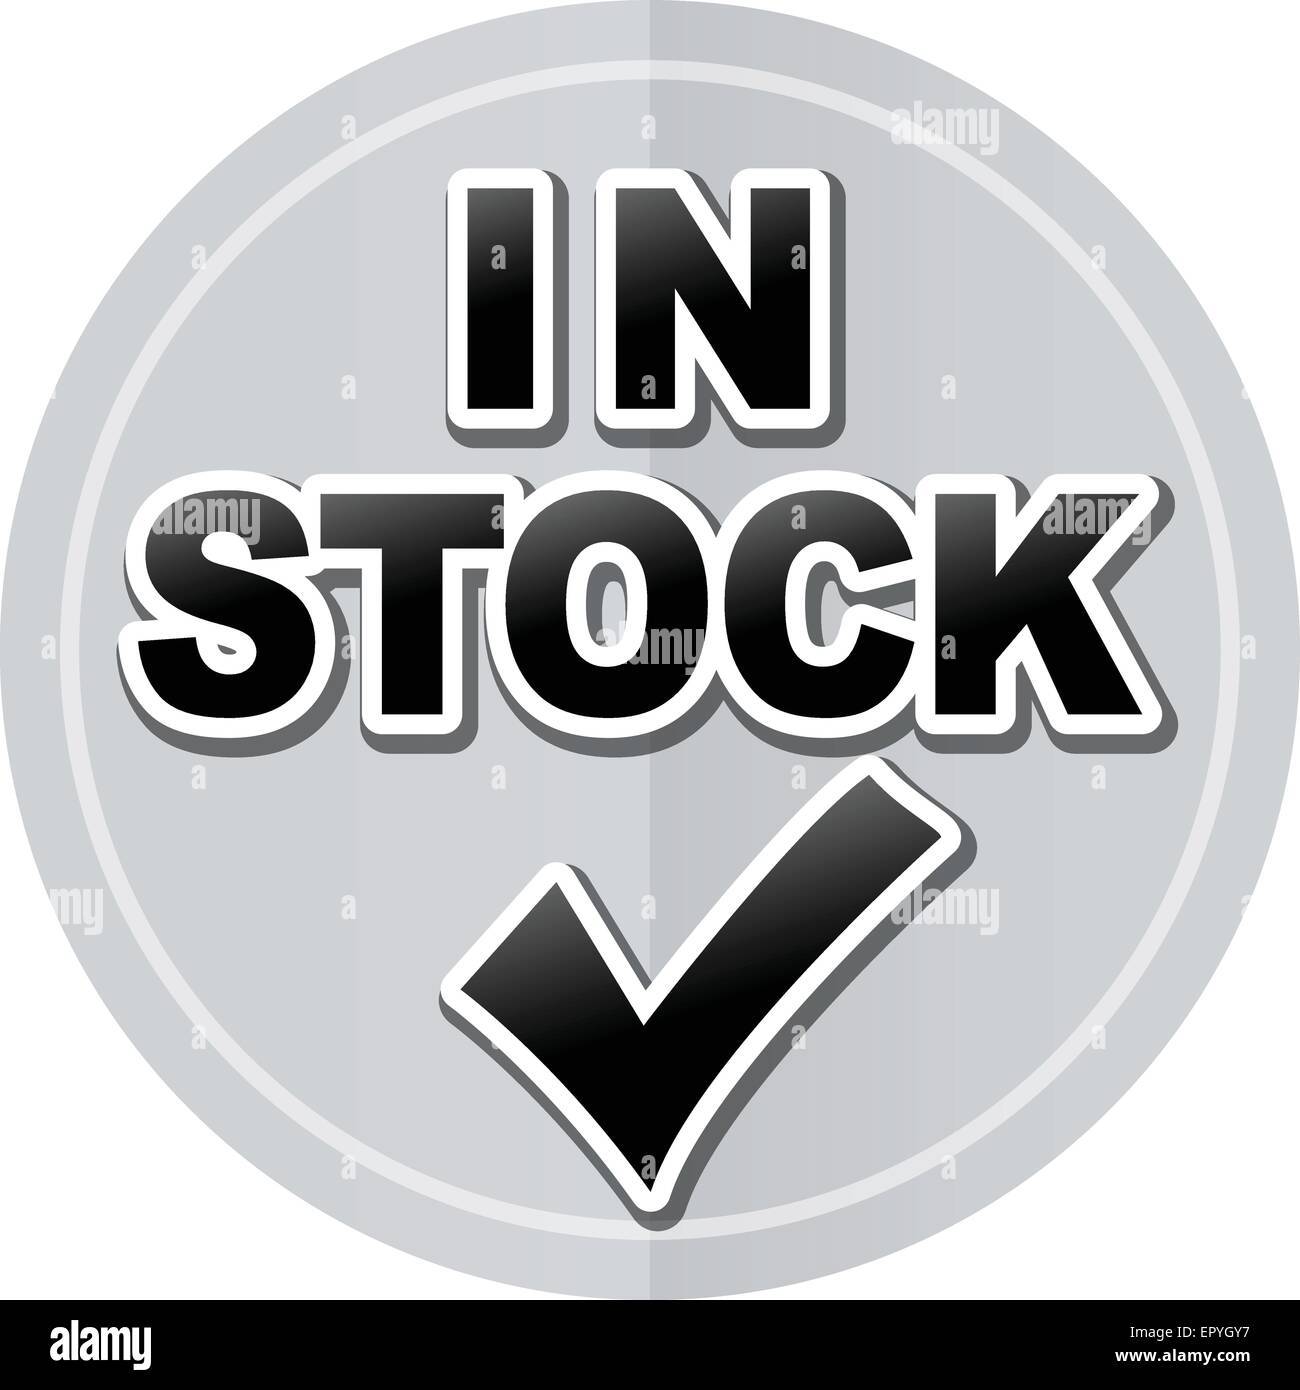 Illustration of availale sticker icon simple design Stock Vector Image ...